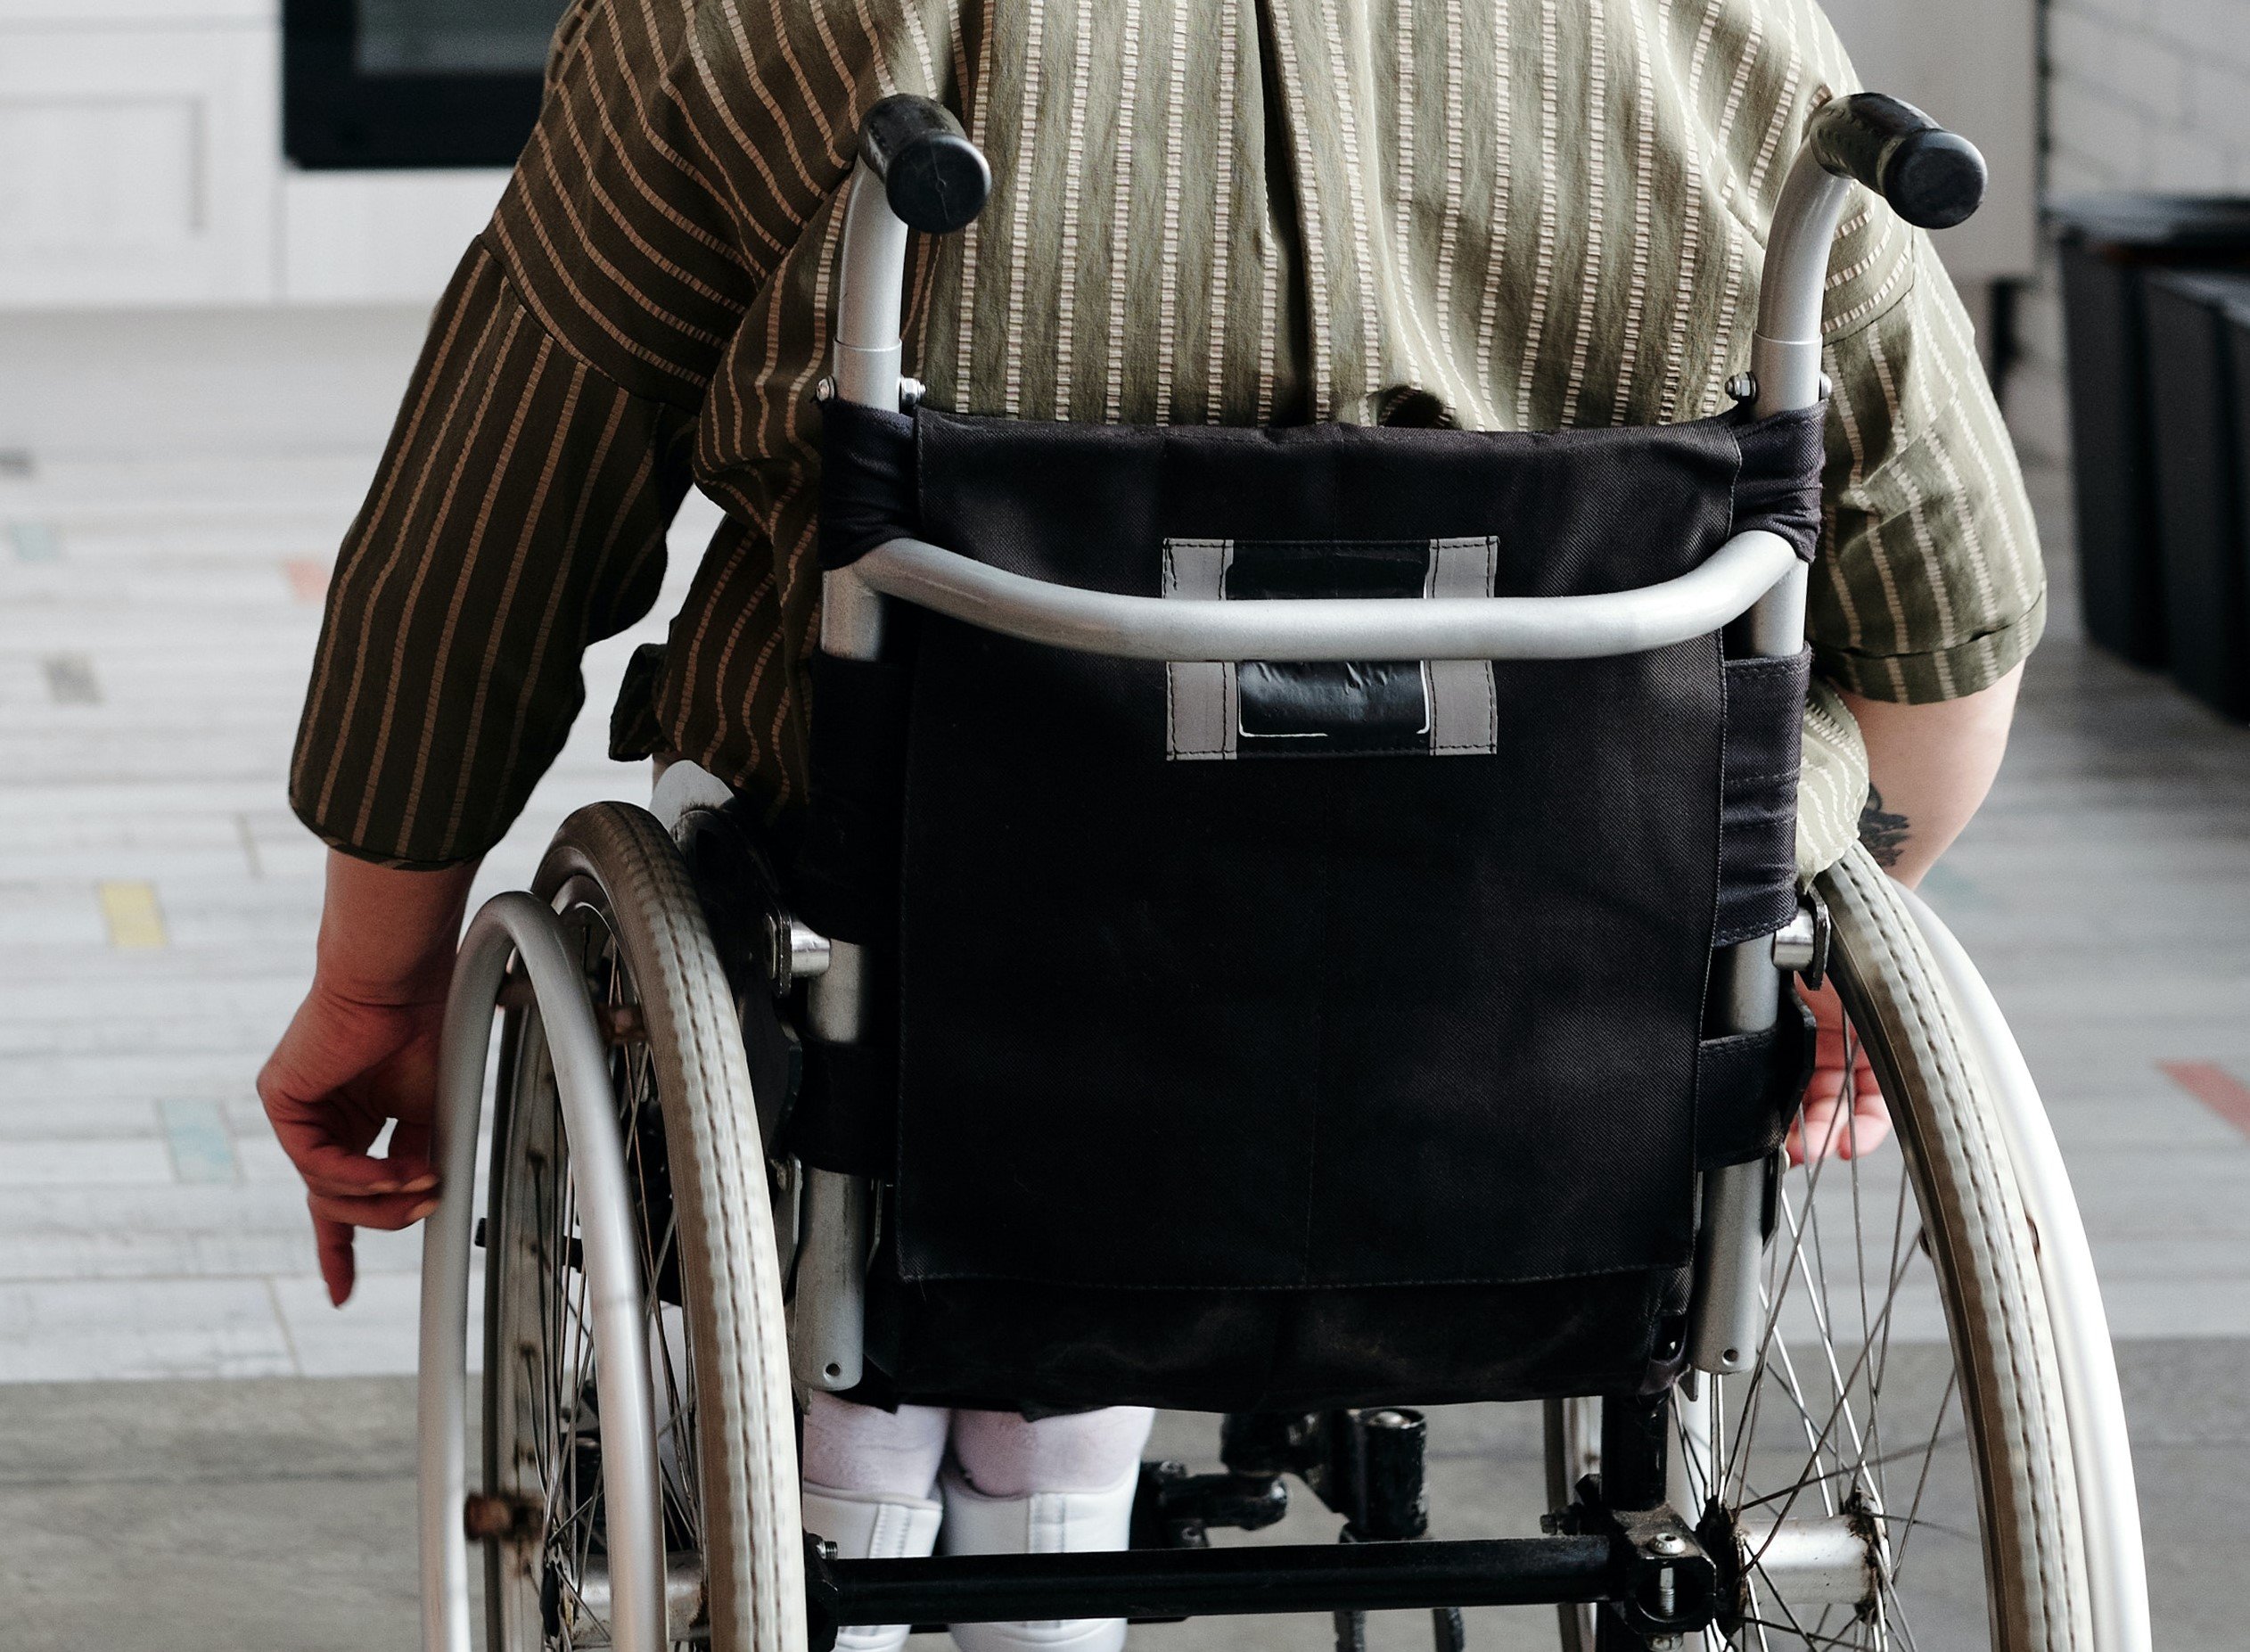 A caretaker arrived with someone in a wheelchair. | Source: Pexels